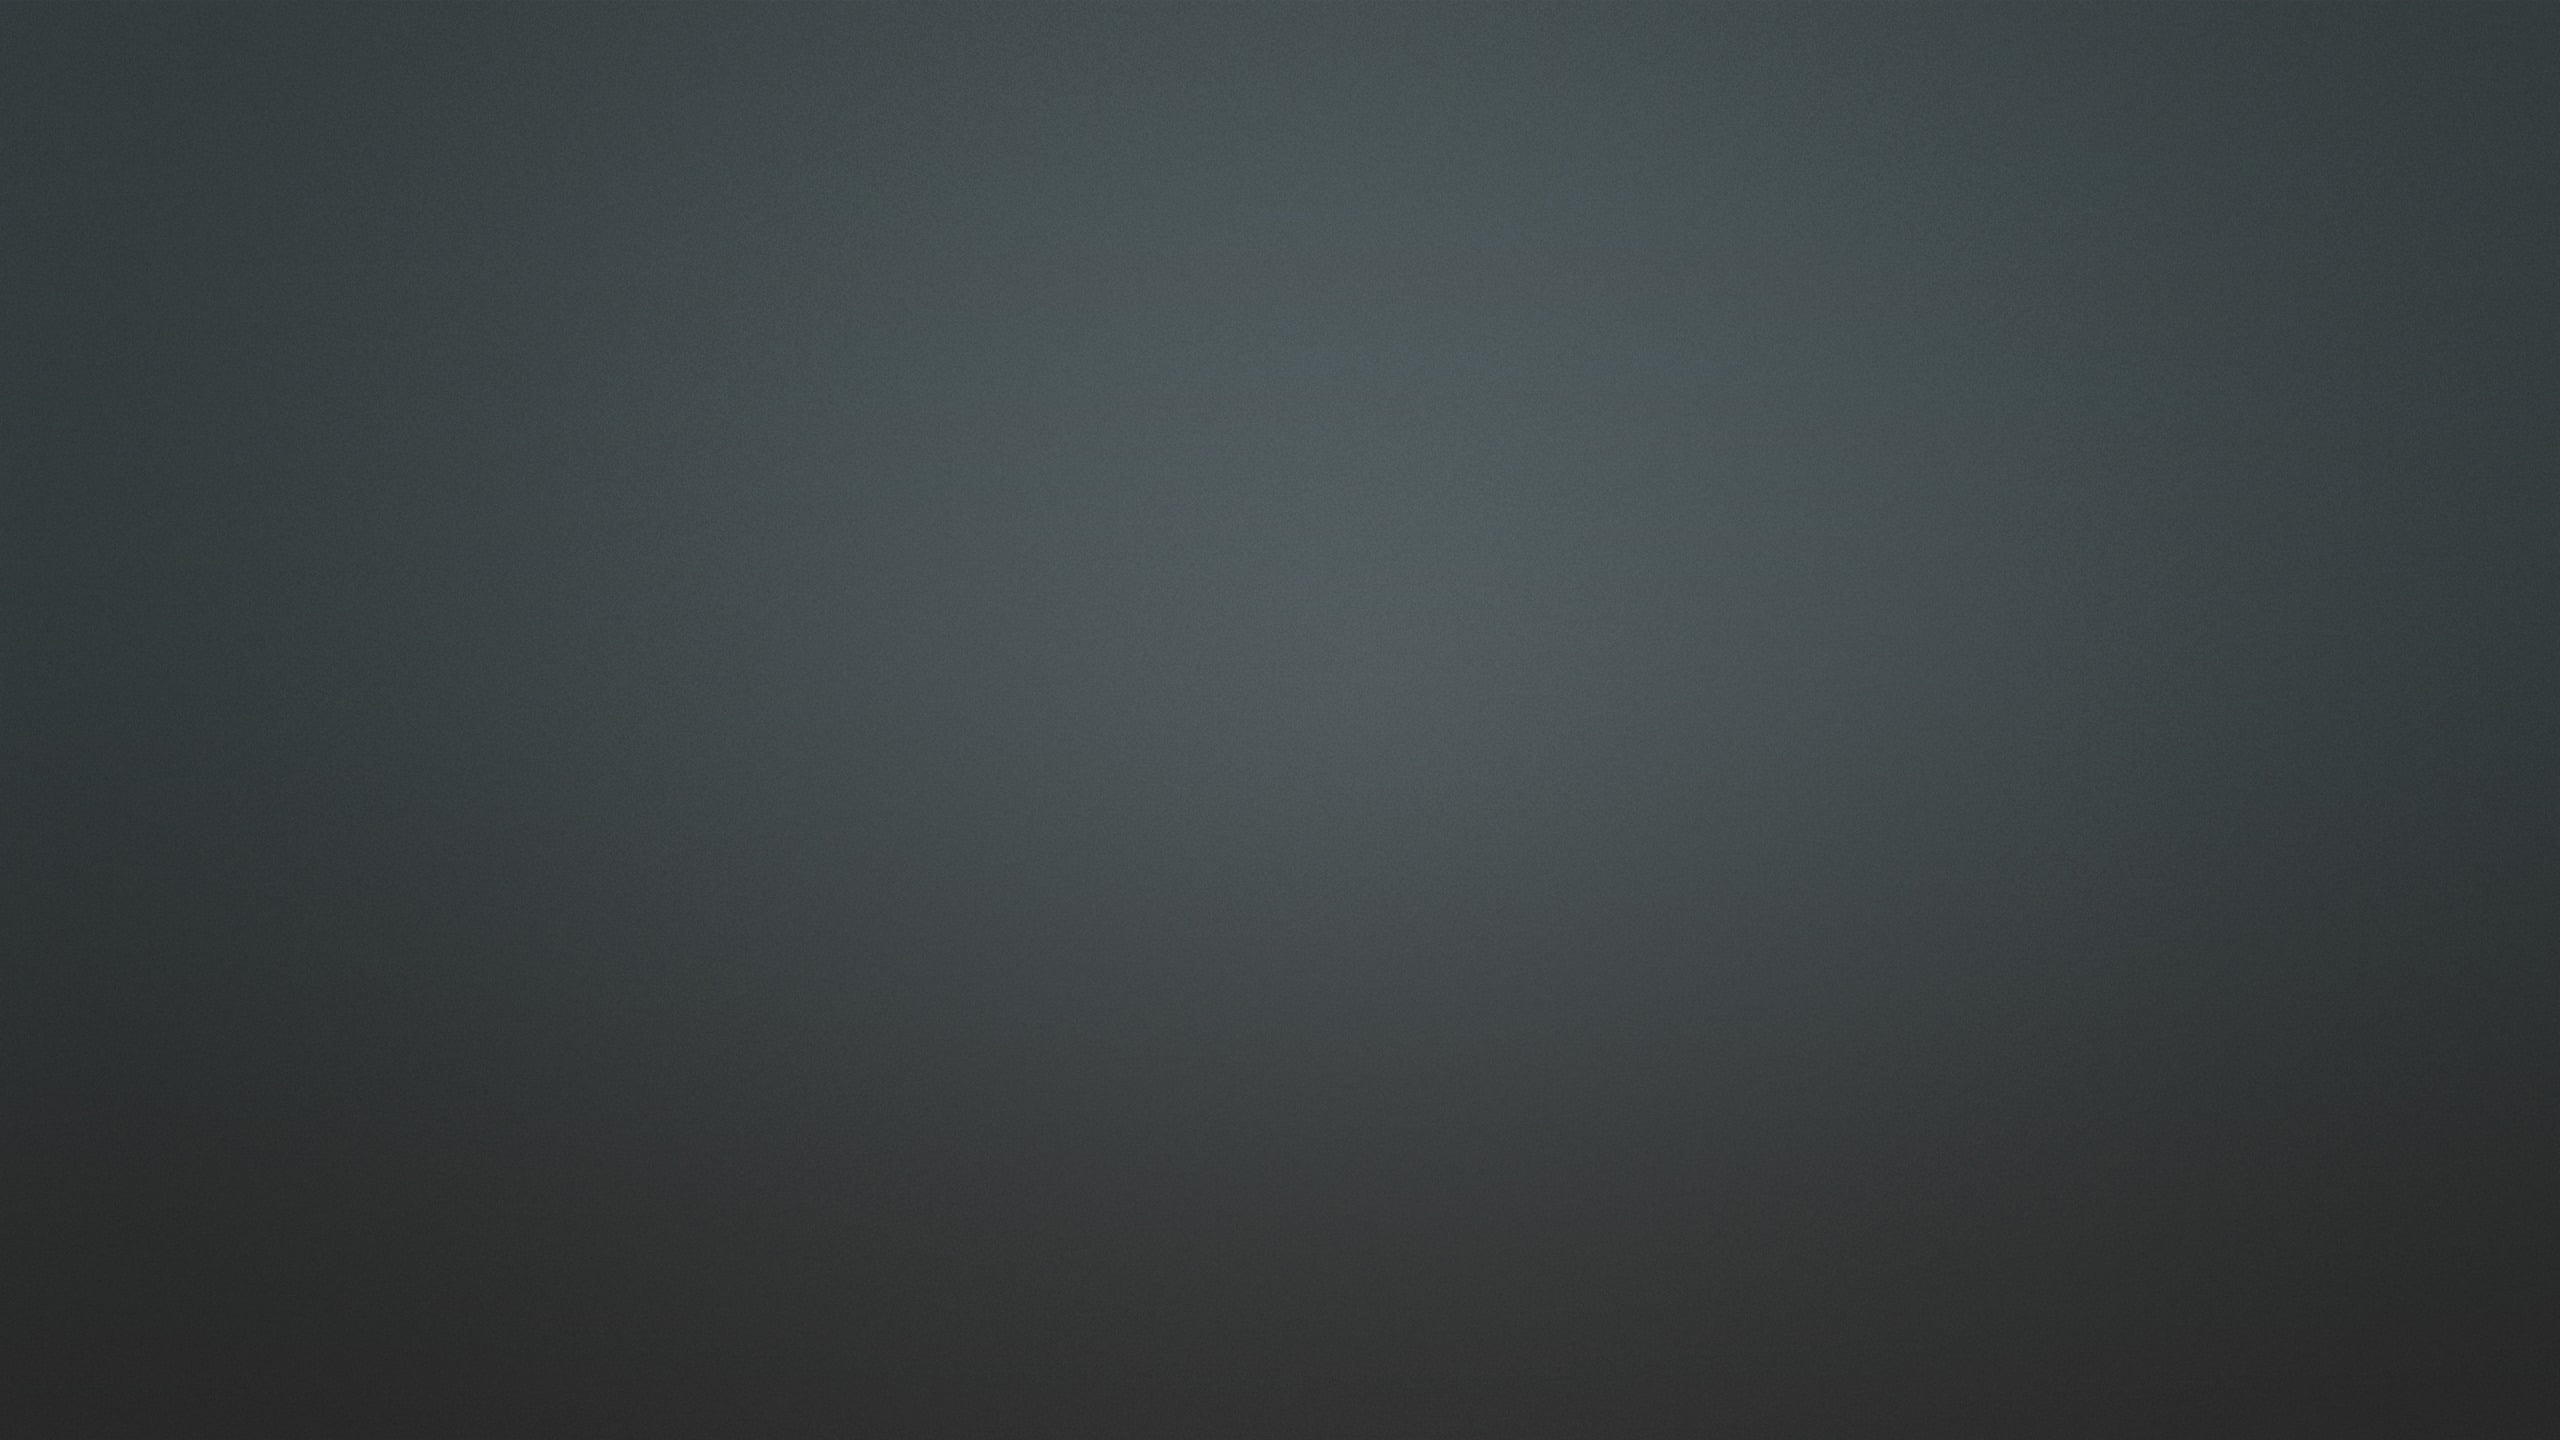 simple, gradient, backgrounds, copy space, gray, full frame